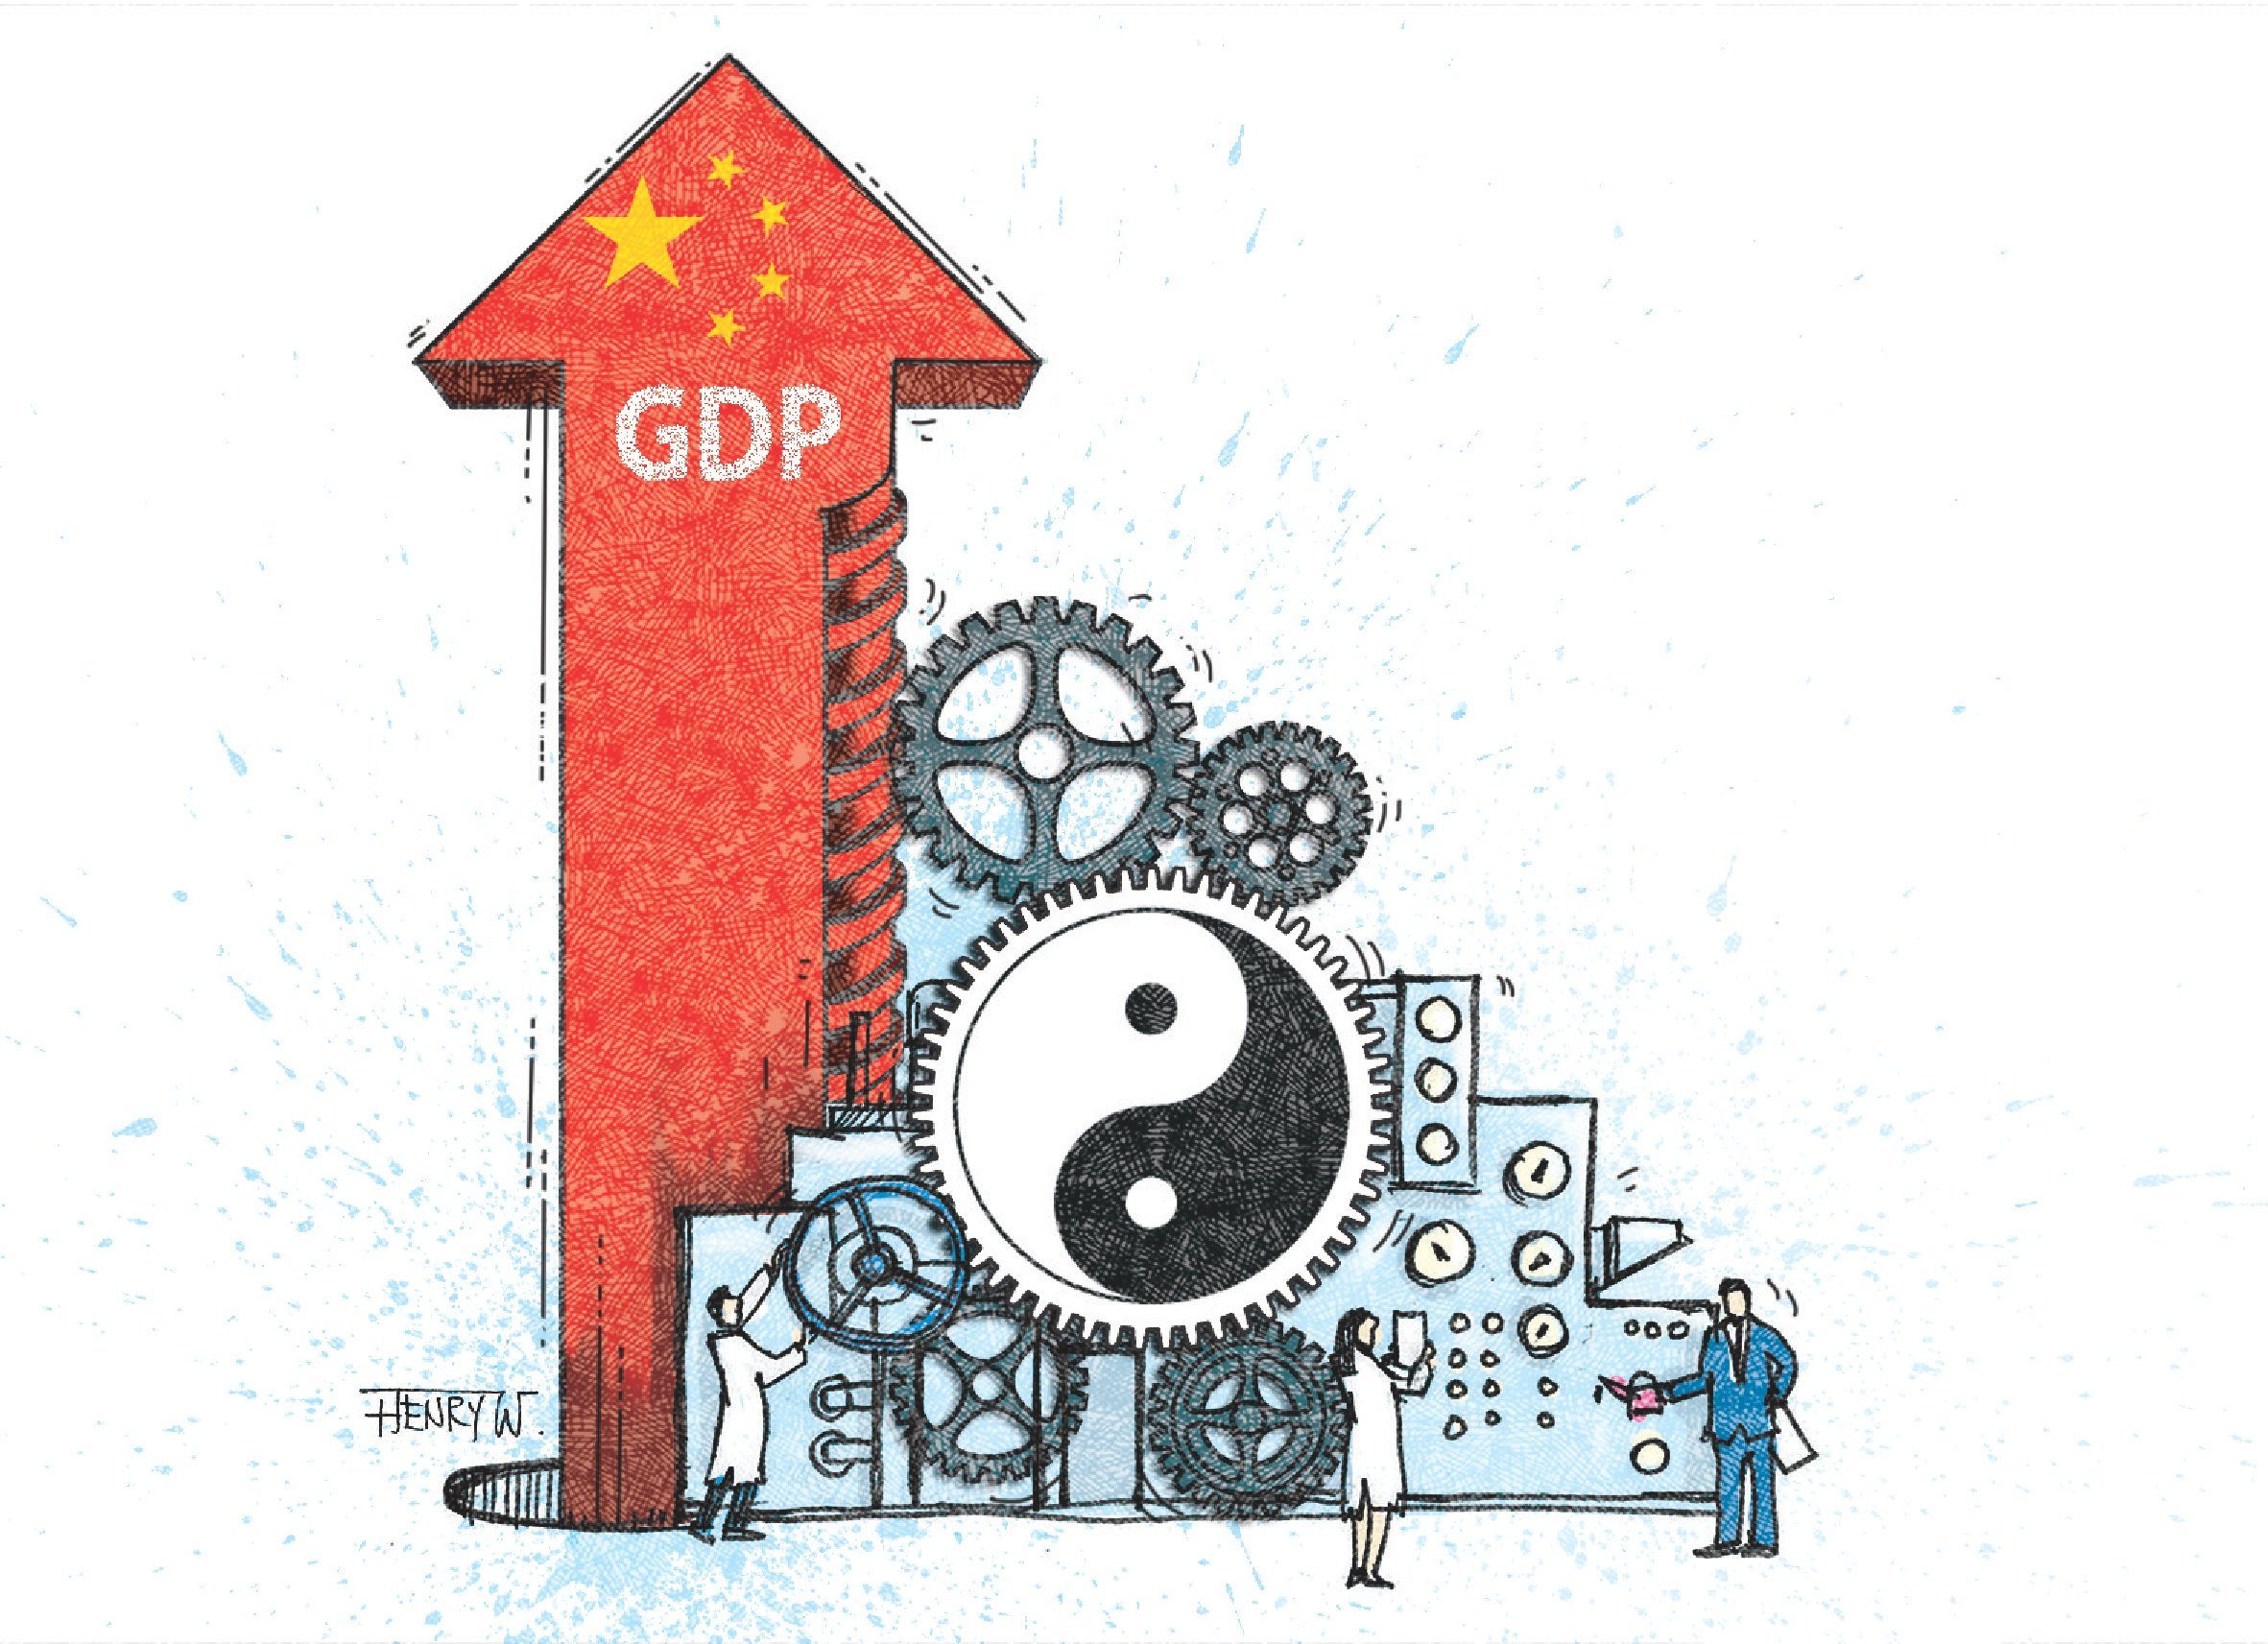 China's transition to the "new normal" will continue to deliver progress.